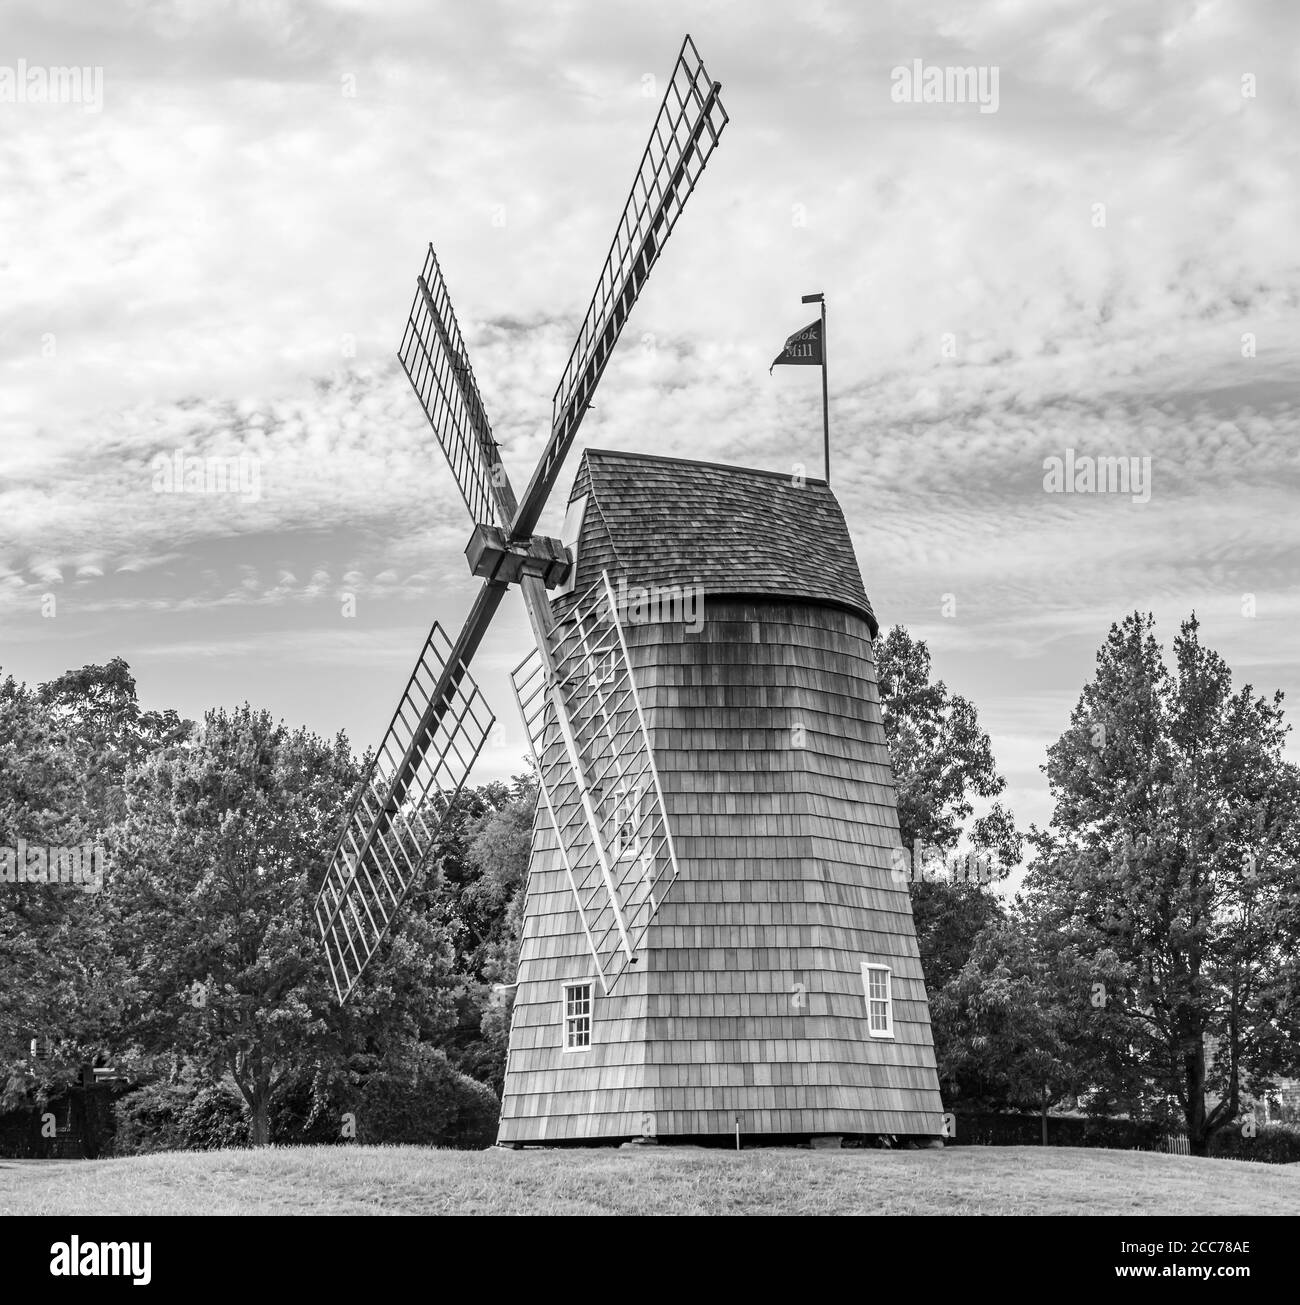 Black and white image of the Hook windmill in East Hampton, NY Stock Photo